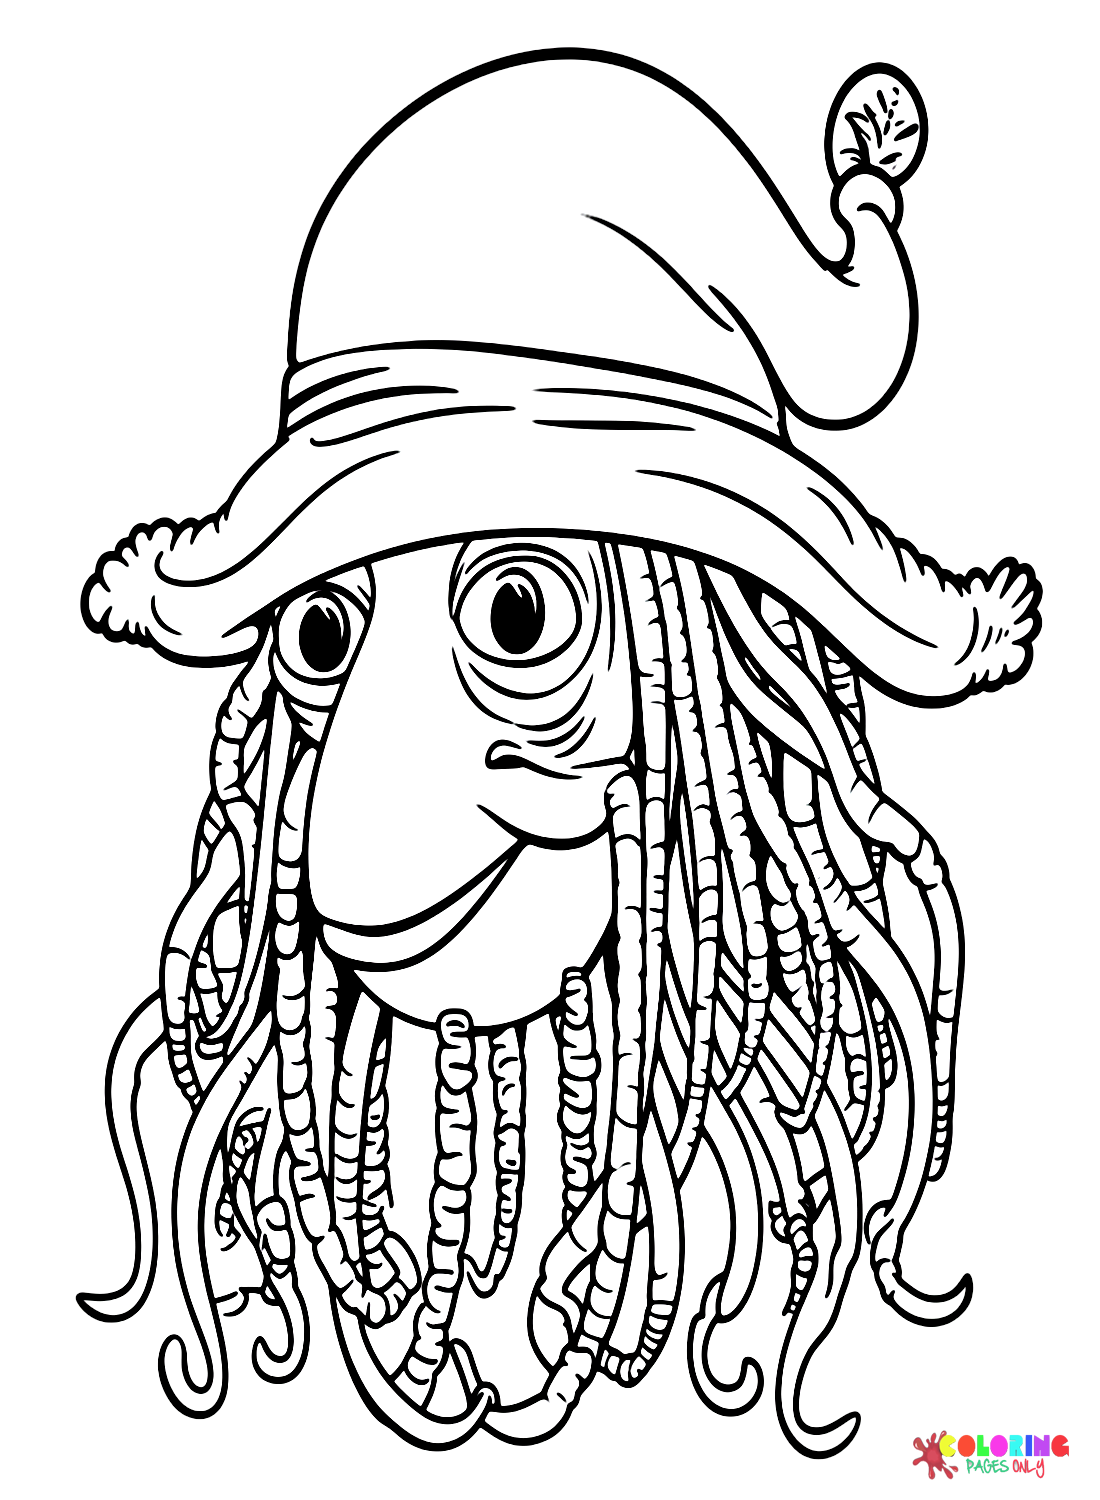 Worm With Dreadlocks and a Hat Coloring Page